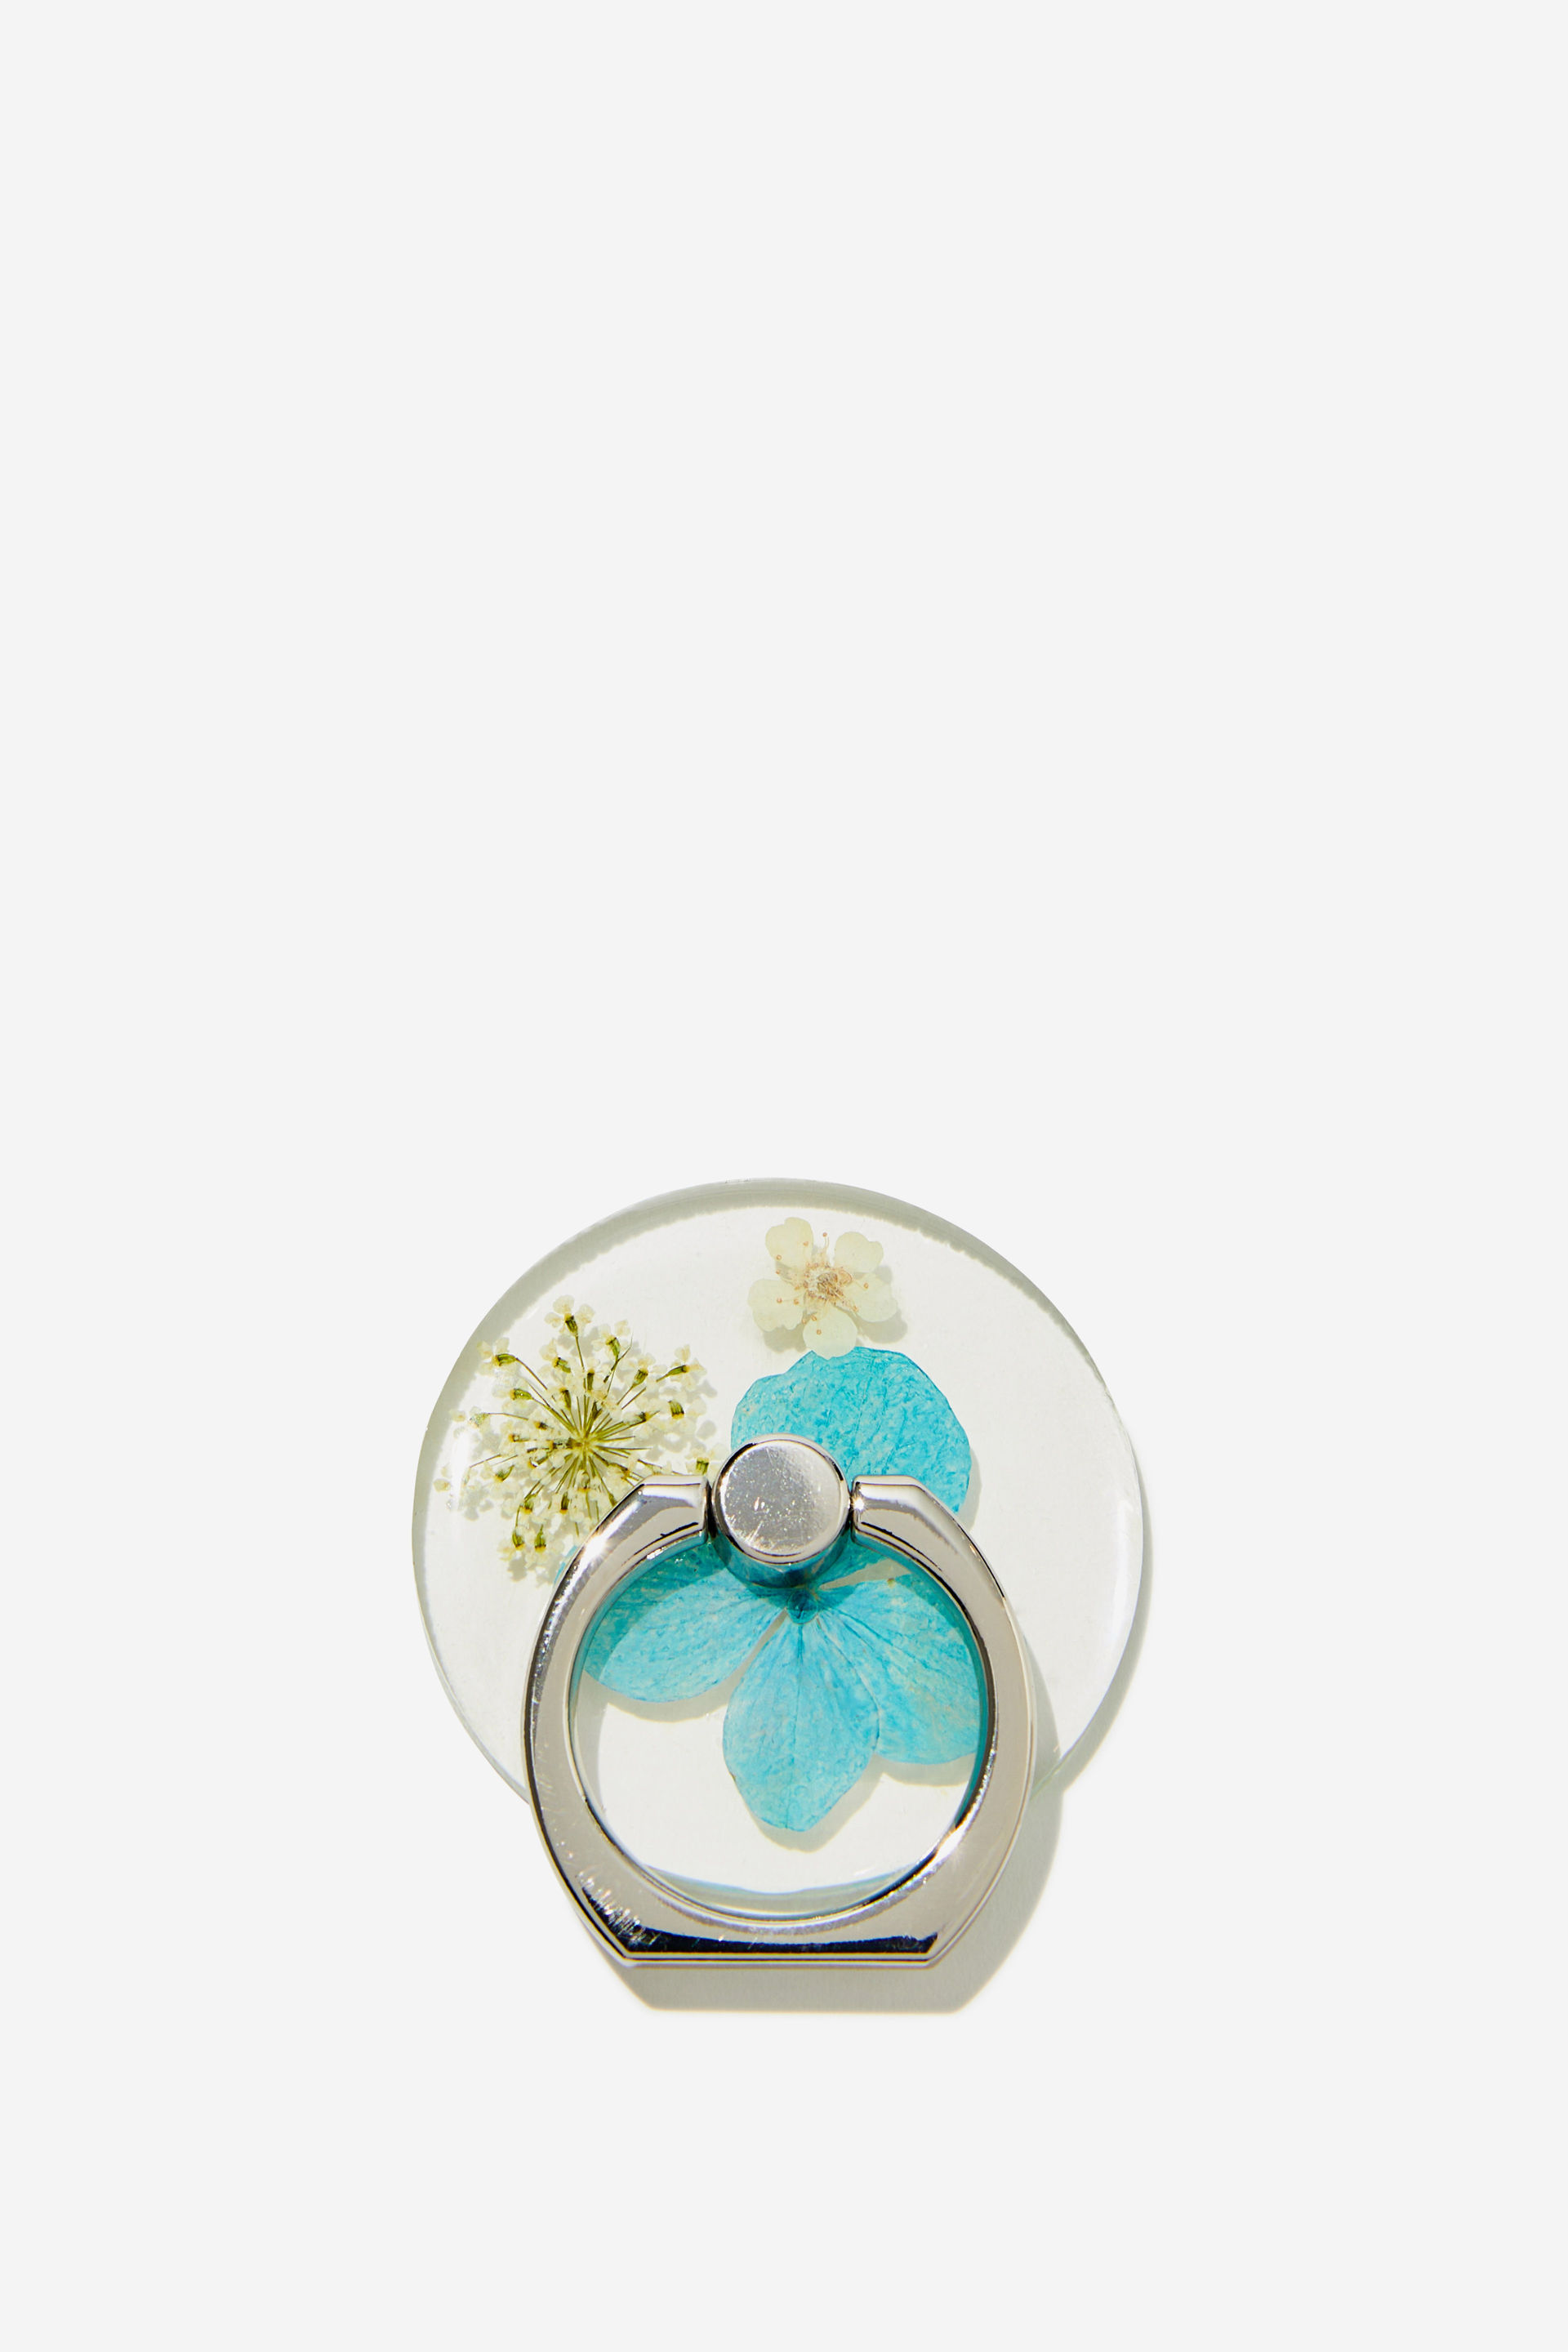 Typo - Trapped Flower Phone Ring - Trapped daisy / arctic blue